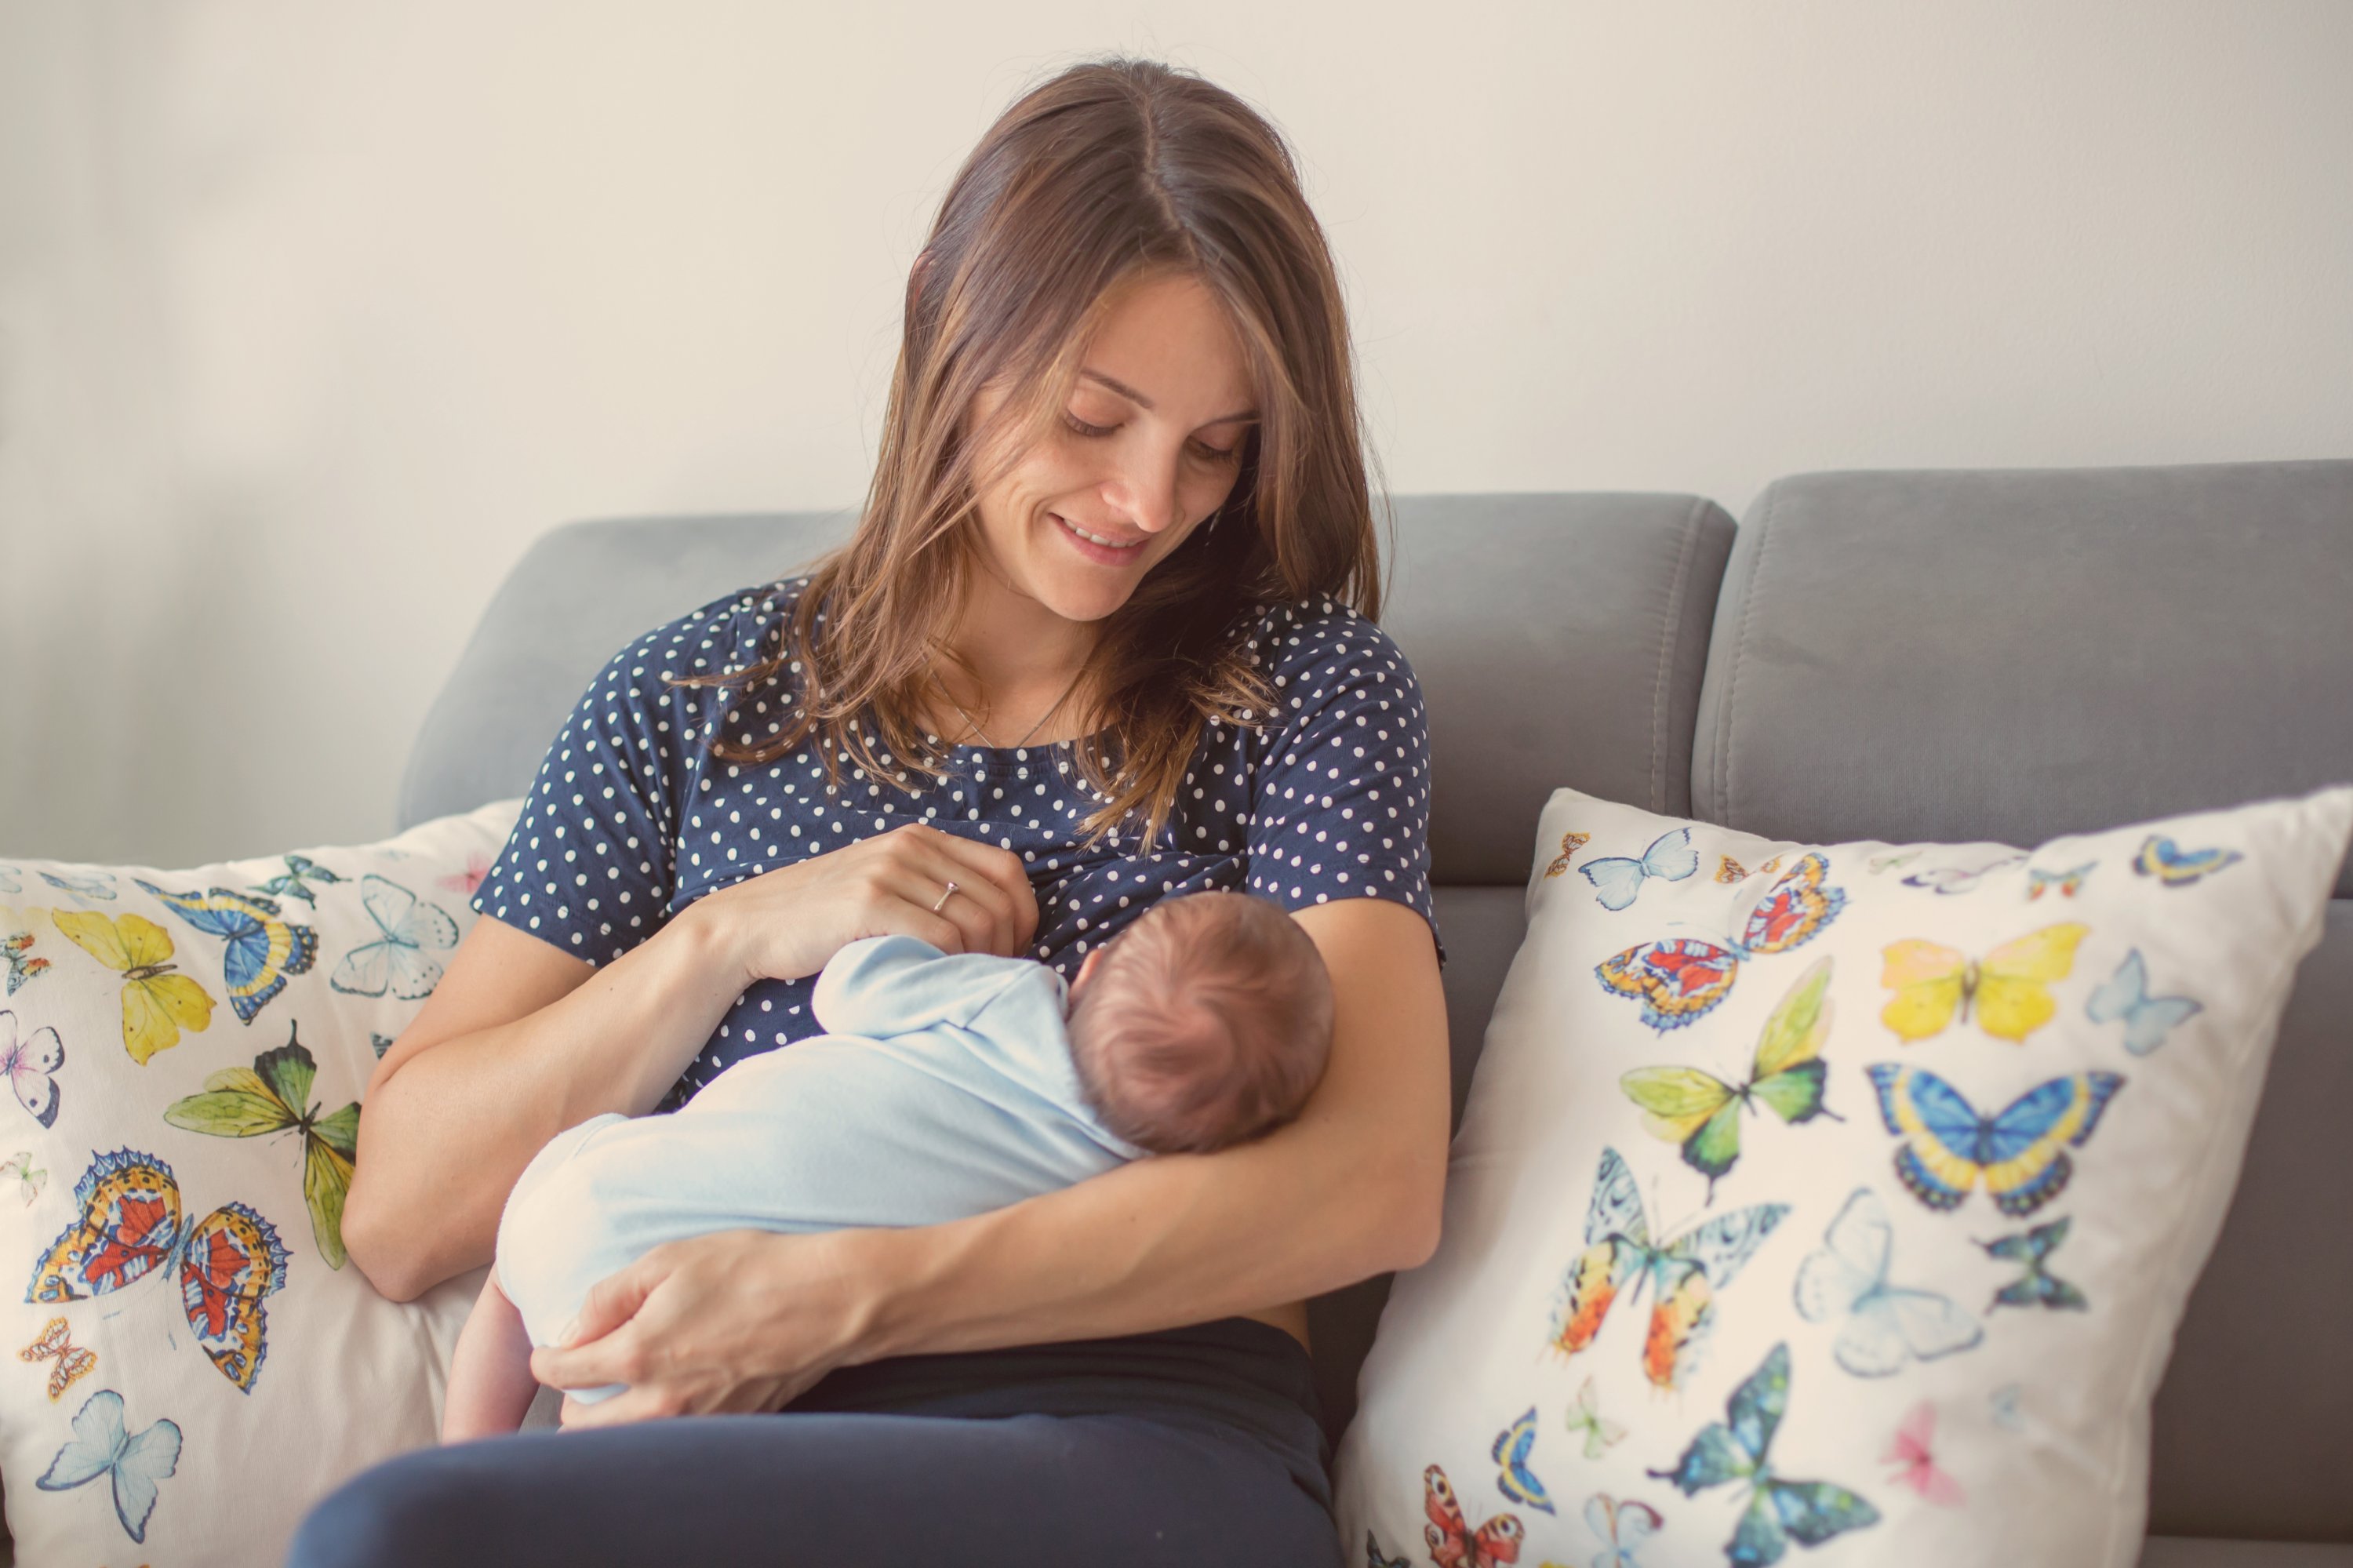 UNICEF Turkey officials say the benefits of breastfeeding outweigh risks associated with the virus. (Shutterstock Photo)